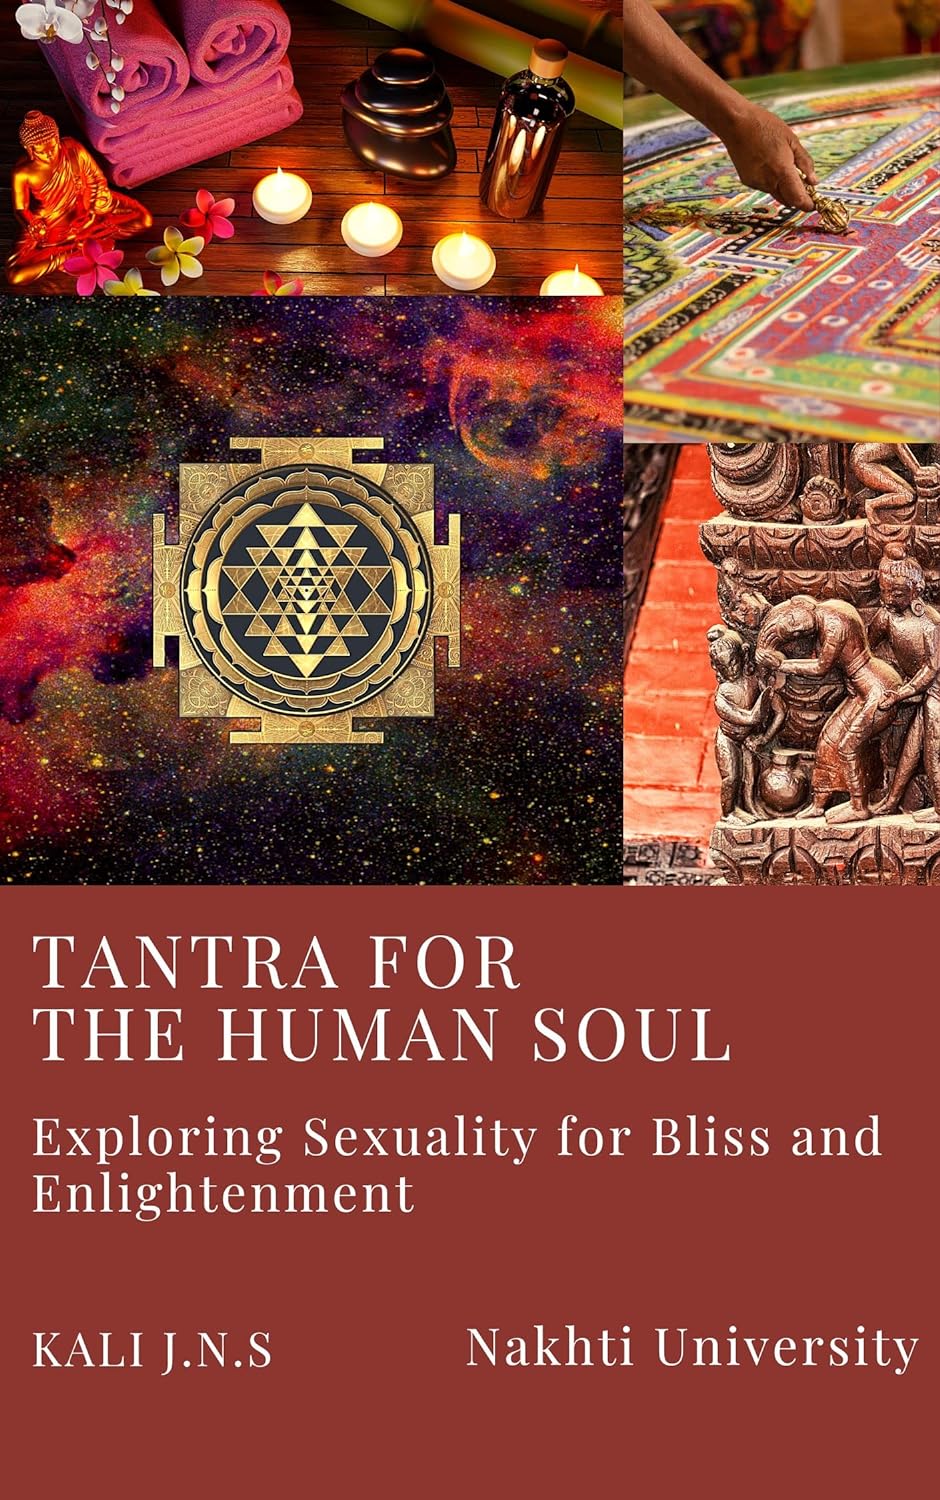 Tantra for the Human Soul: Exploring Sexuality for Bliss and Enlightenment